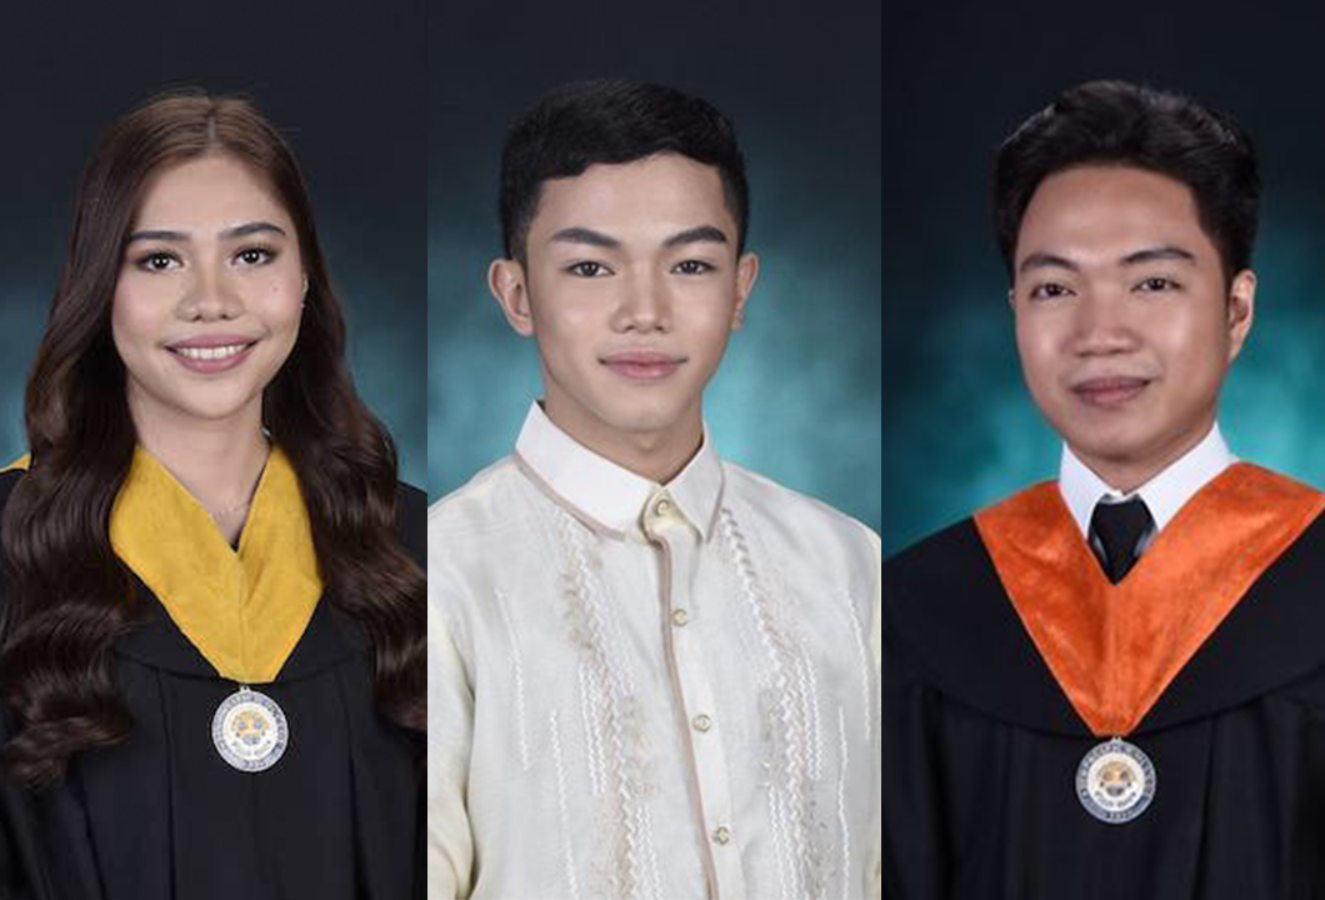 Acads are out, Adulthood is in: Congratulations, SM Isko Batch 2022!